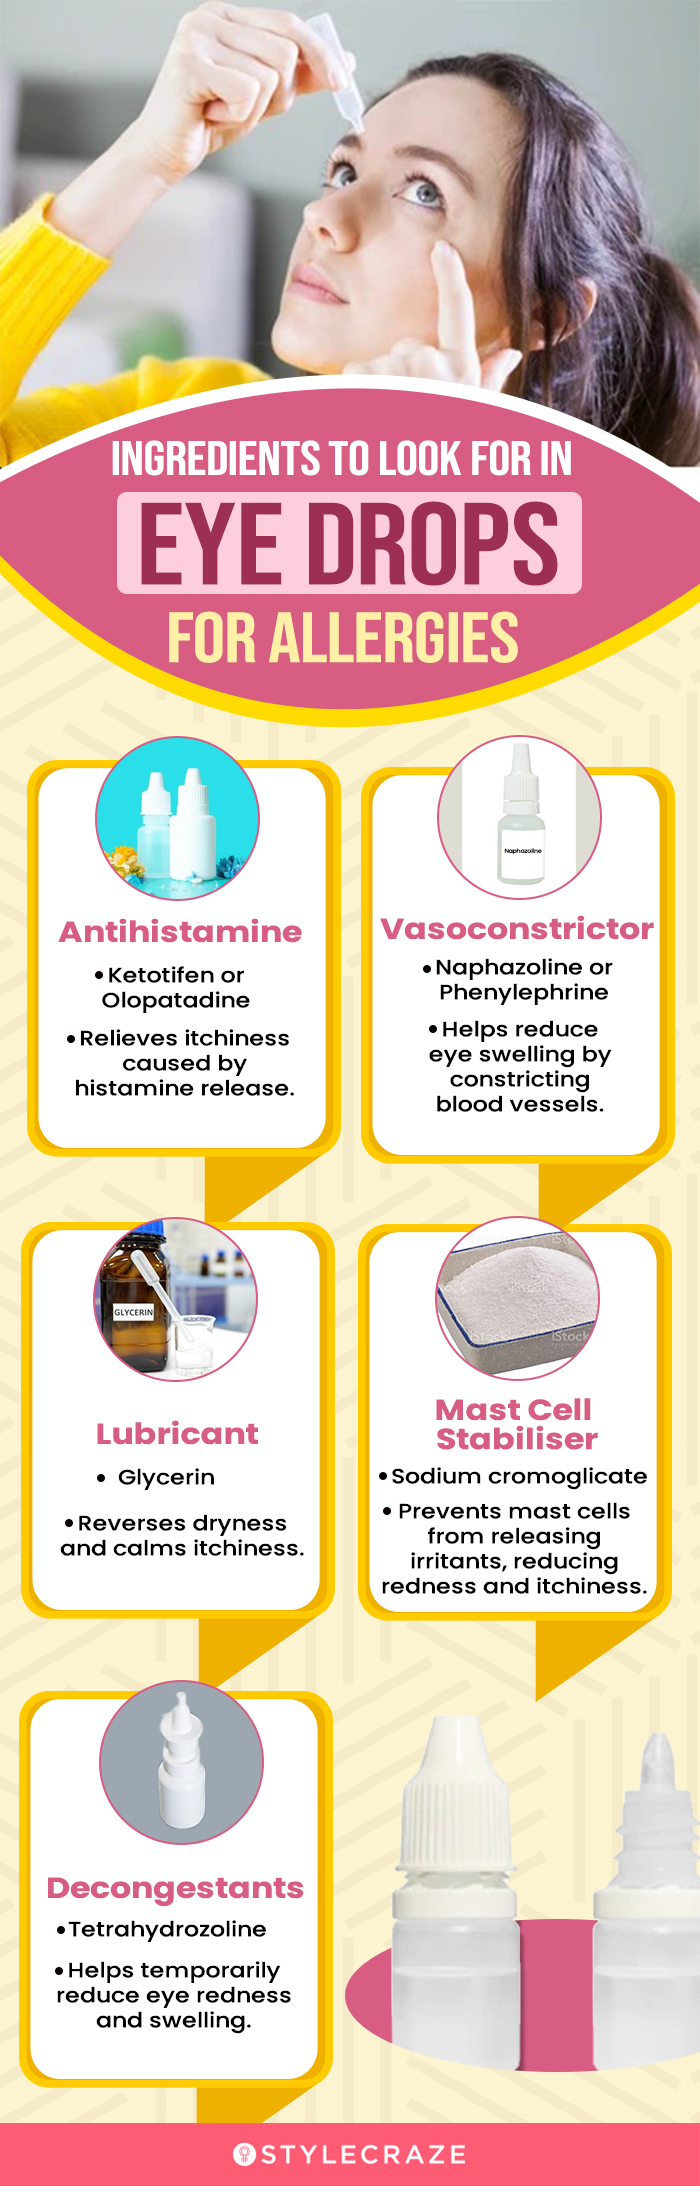 Ingredients To Look For In Eye Drops For Allergies (infographic)